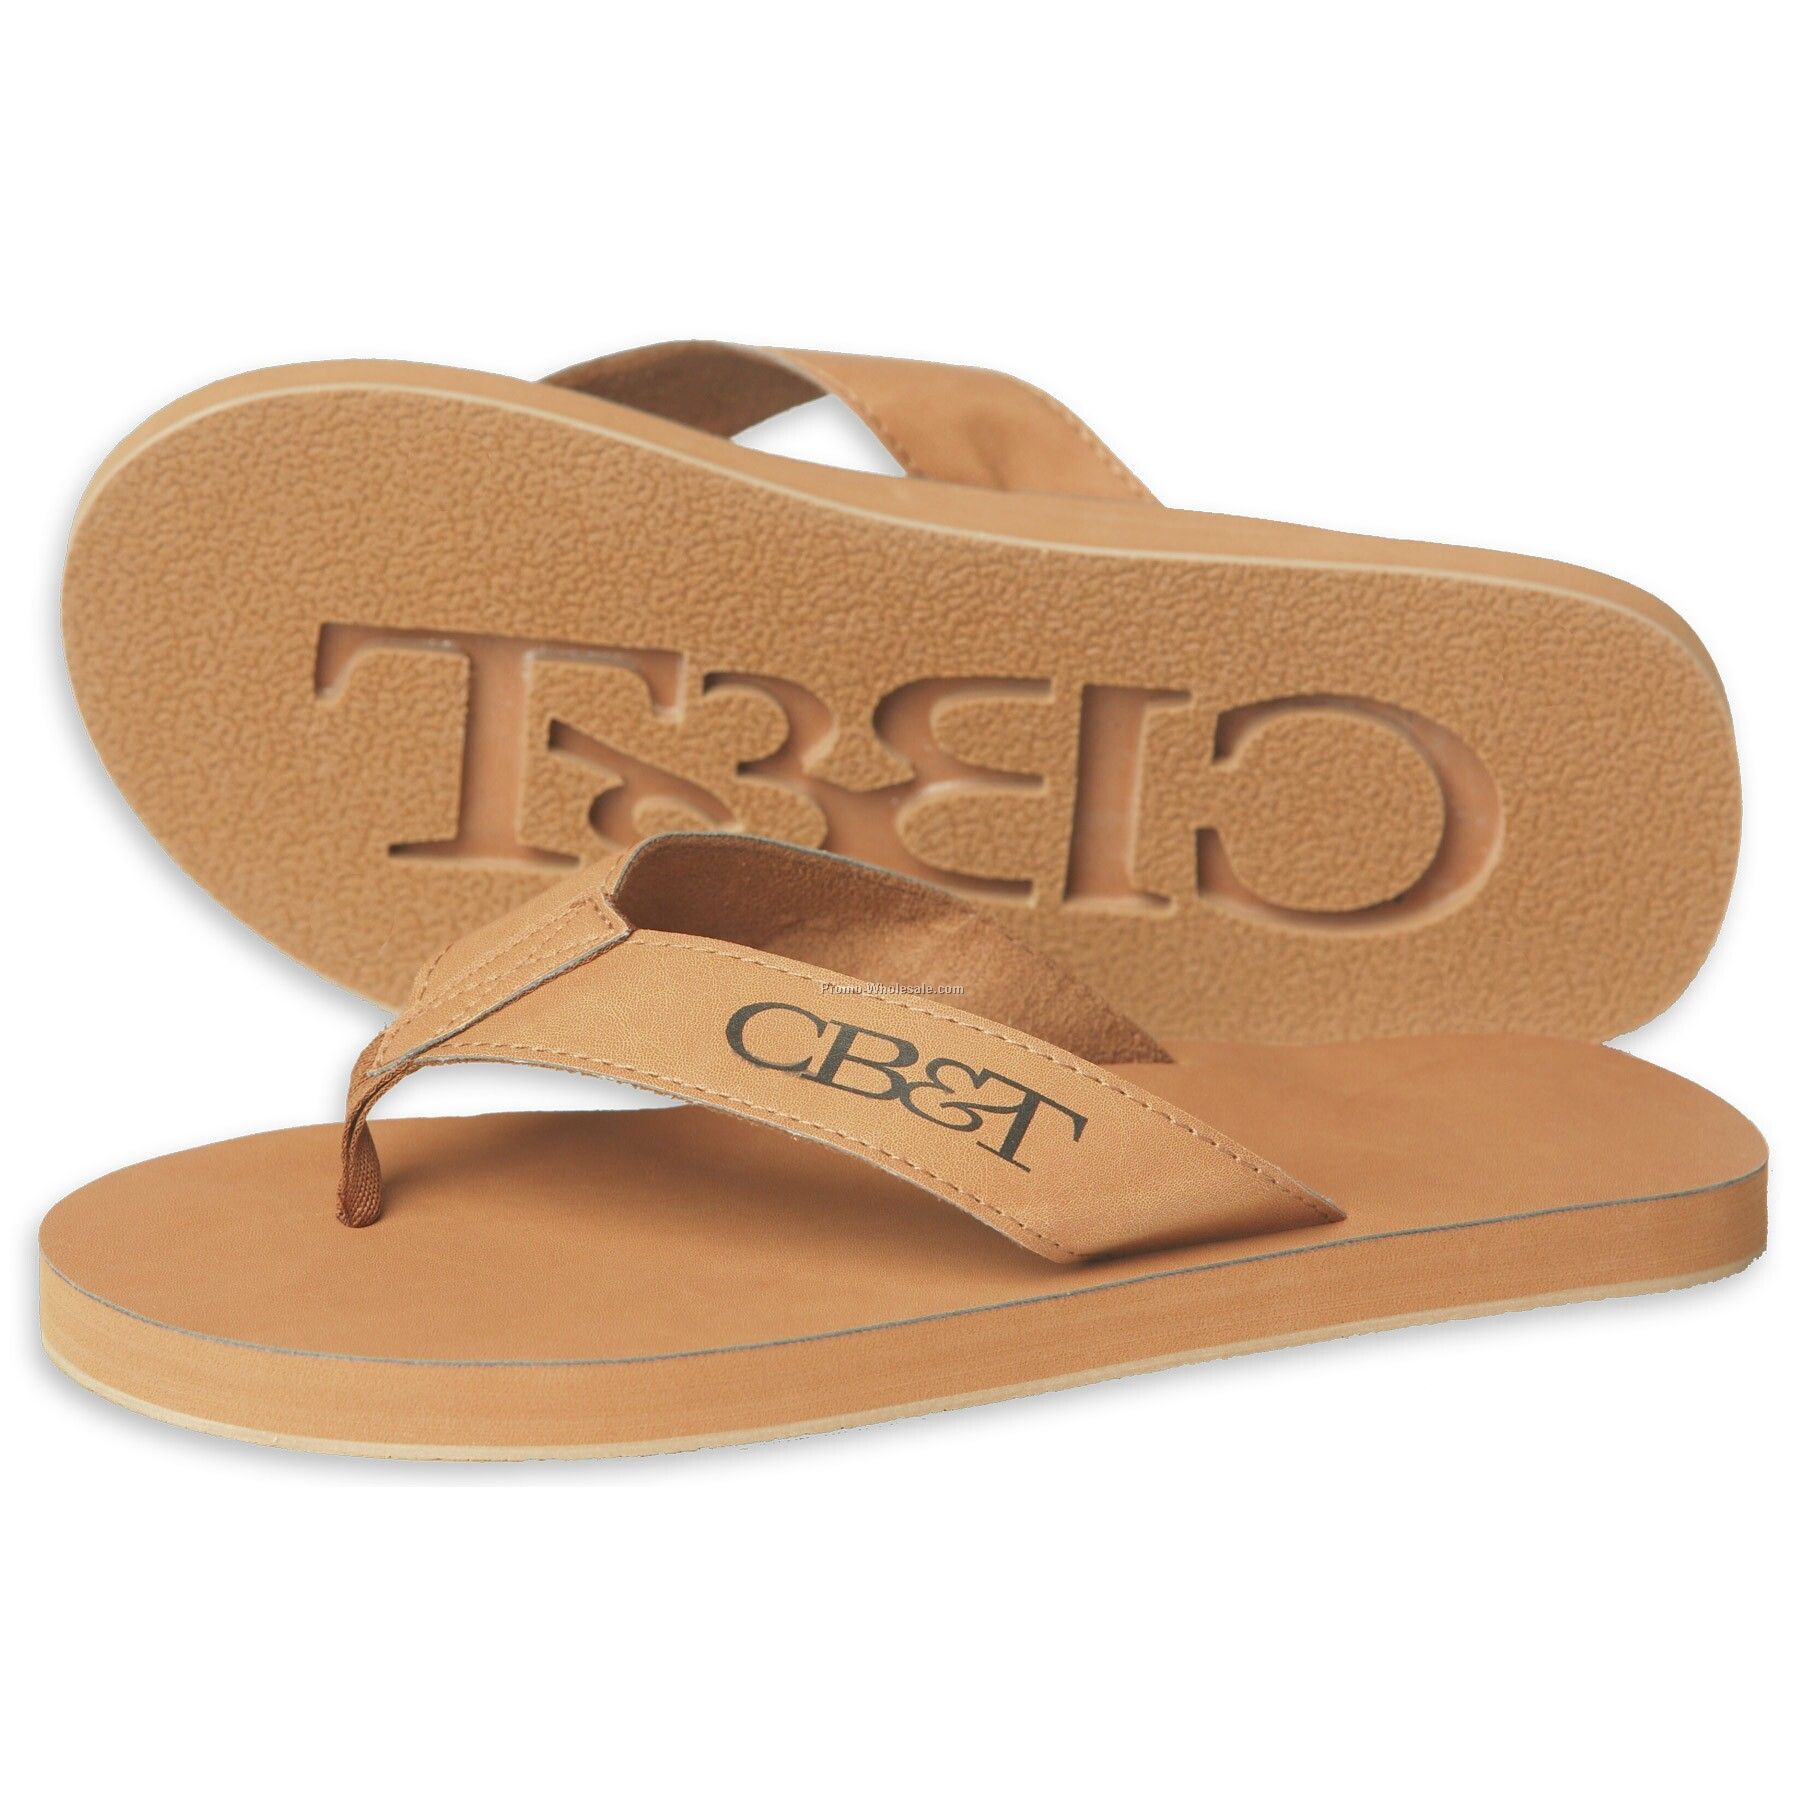 The Del Rey Sandals - Synthetic Leather With Arch Support (Import)